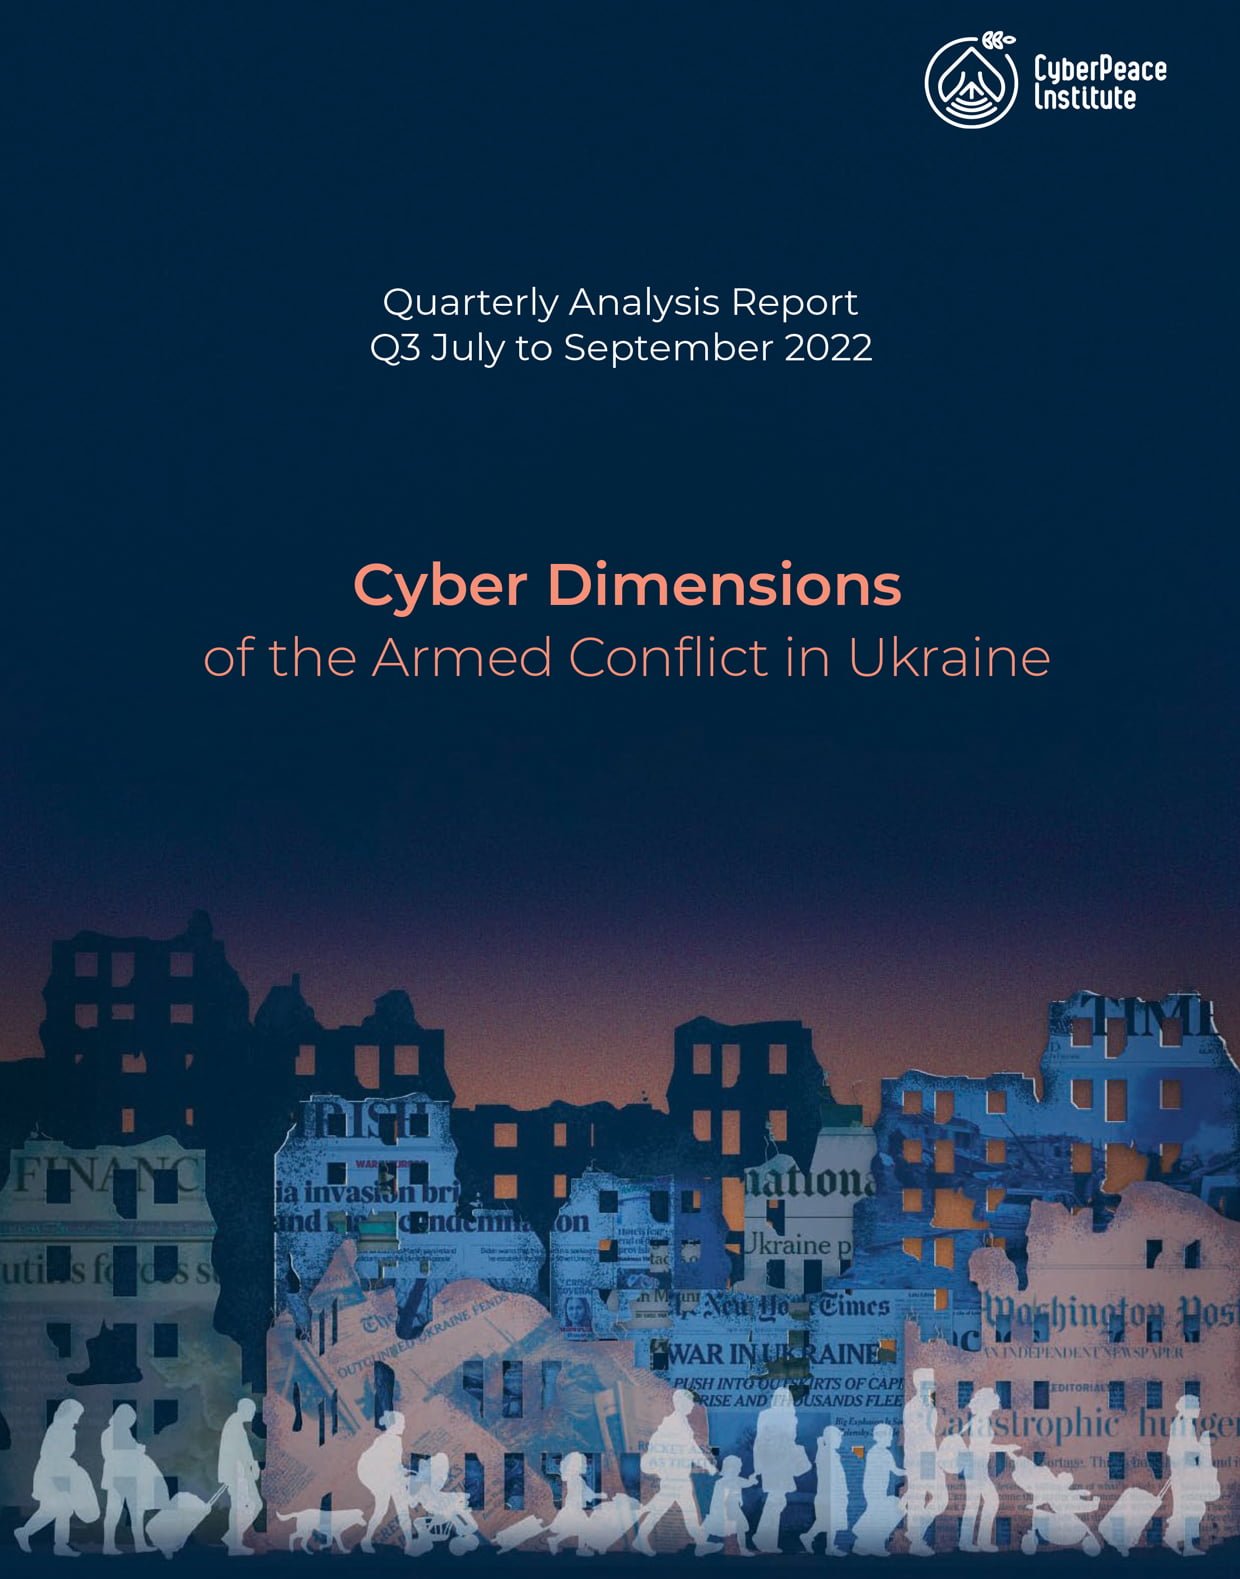 Cyber Dimensions of the Armed Conflict in Ukraine – Q3 2022